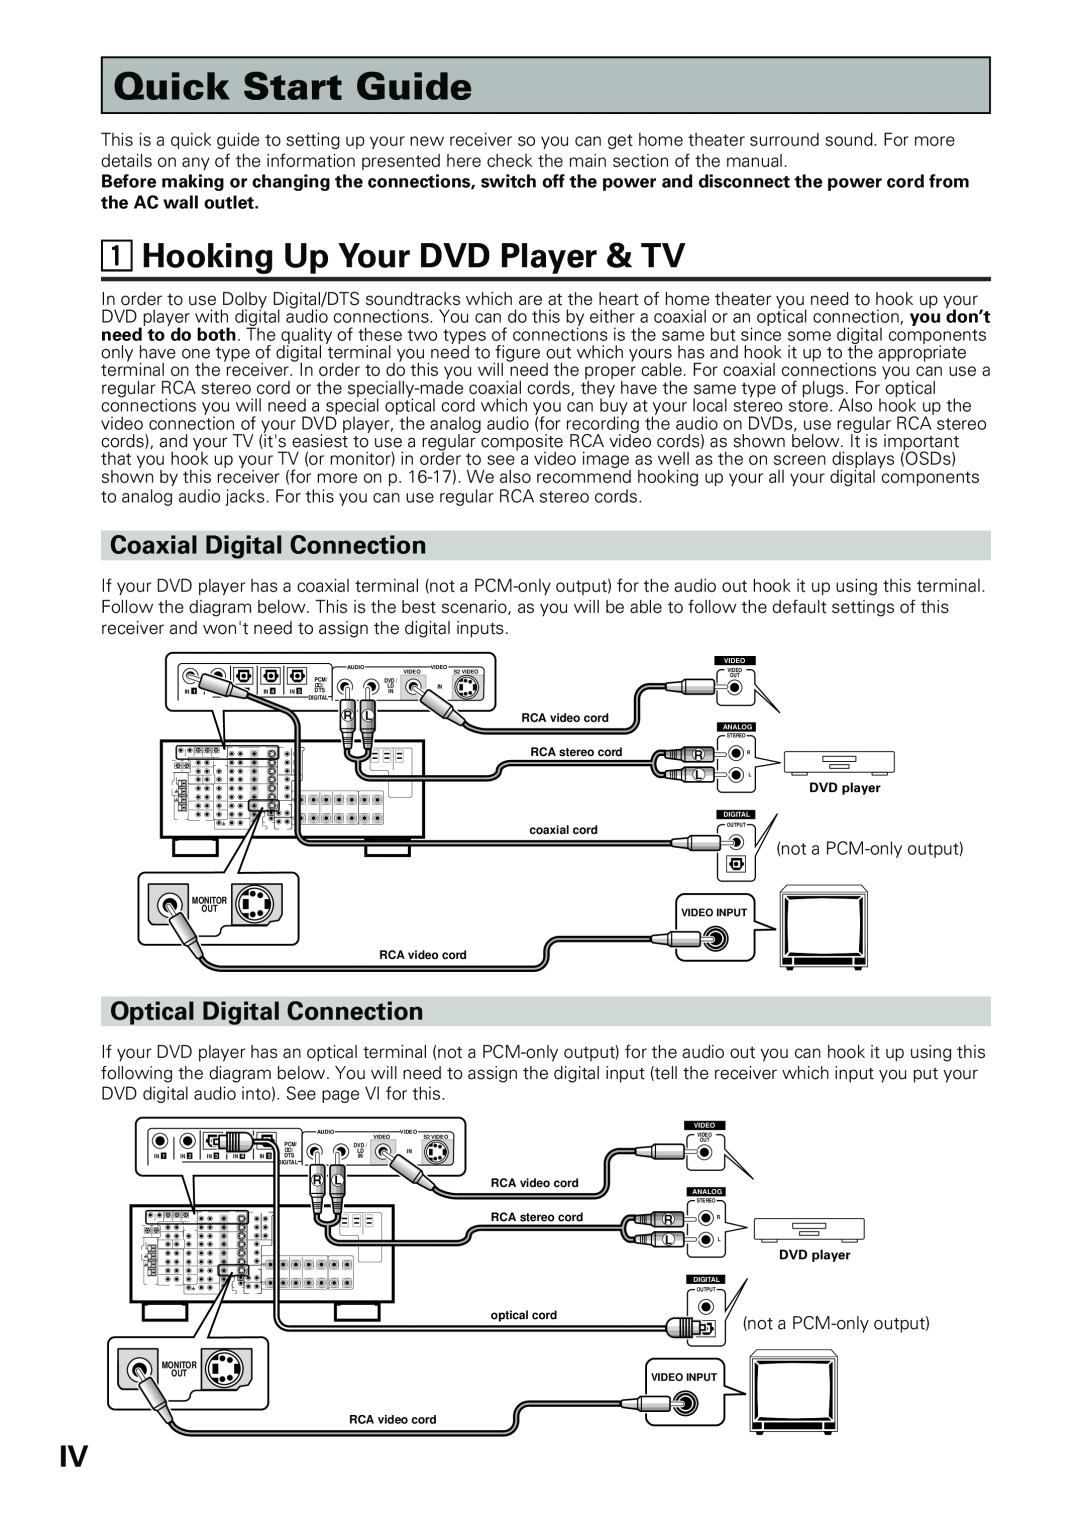 Pioneer VSX-D909S manual Quick Start Guide, 1Hooking Up Your DVD Player & TV, Coaxial Digital Connection 